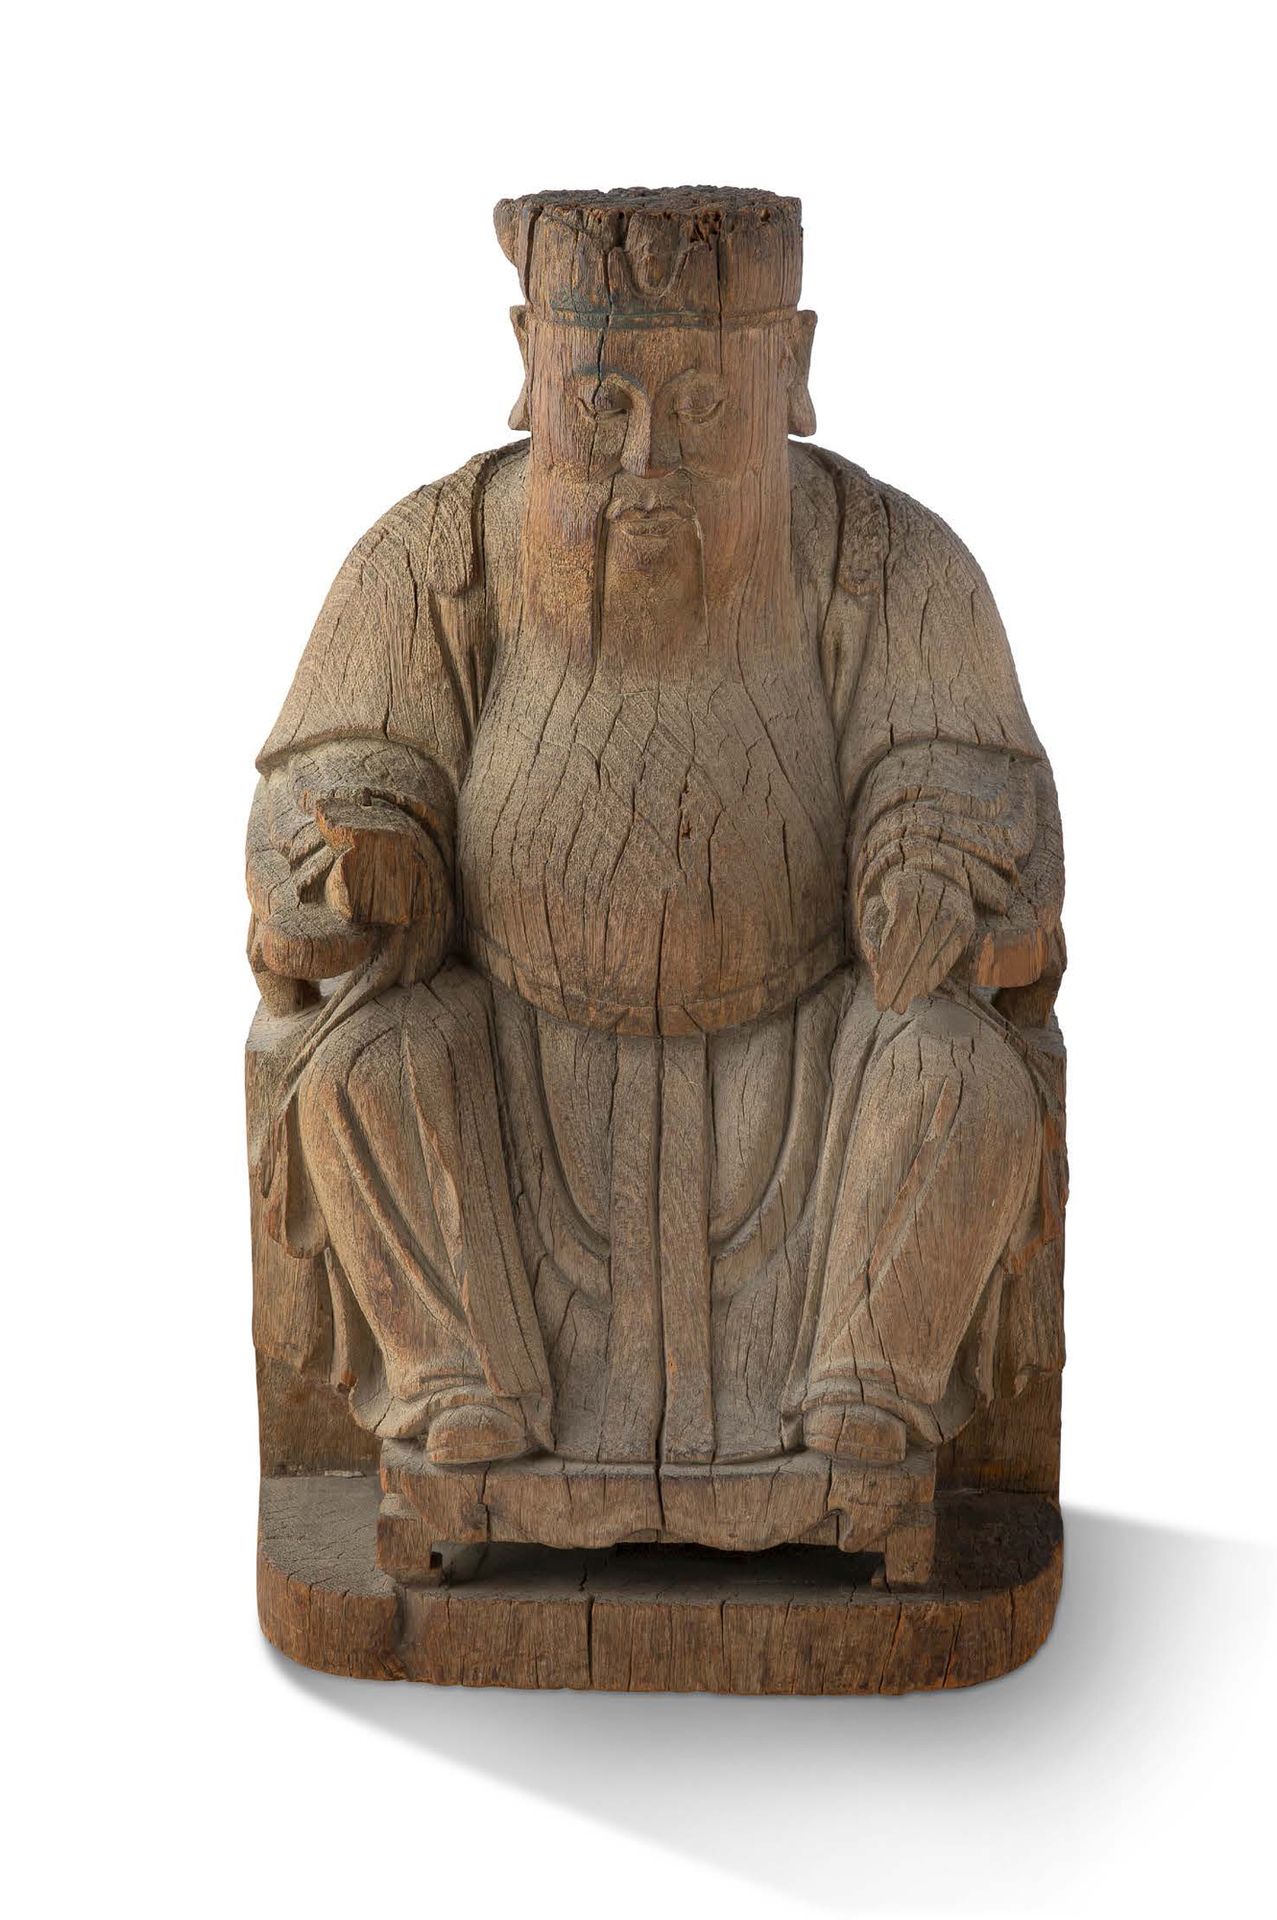 CHINE DYNASTIE QING, XIXe SIÈCLE Imposing carved wooden statue representing a th&hellip;